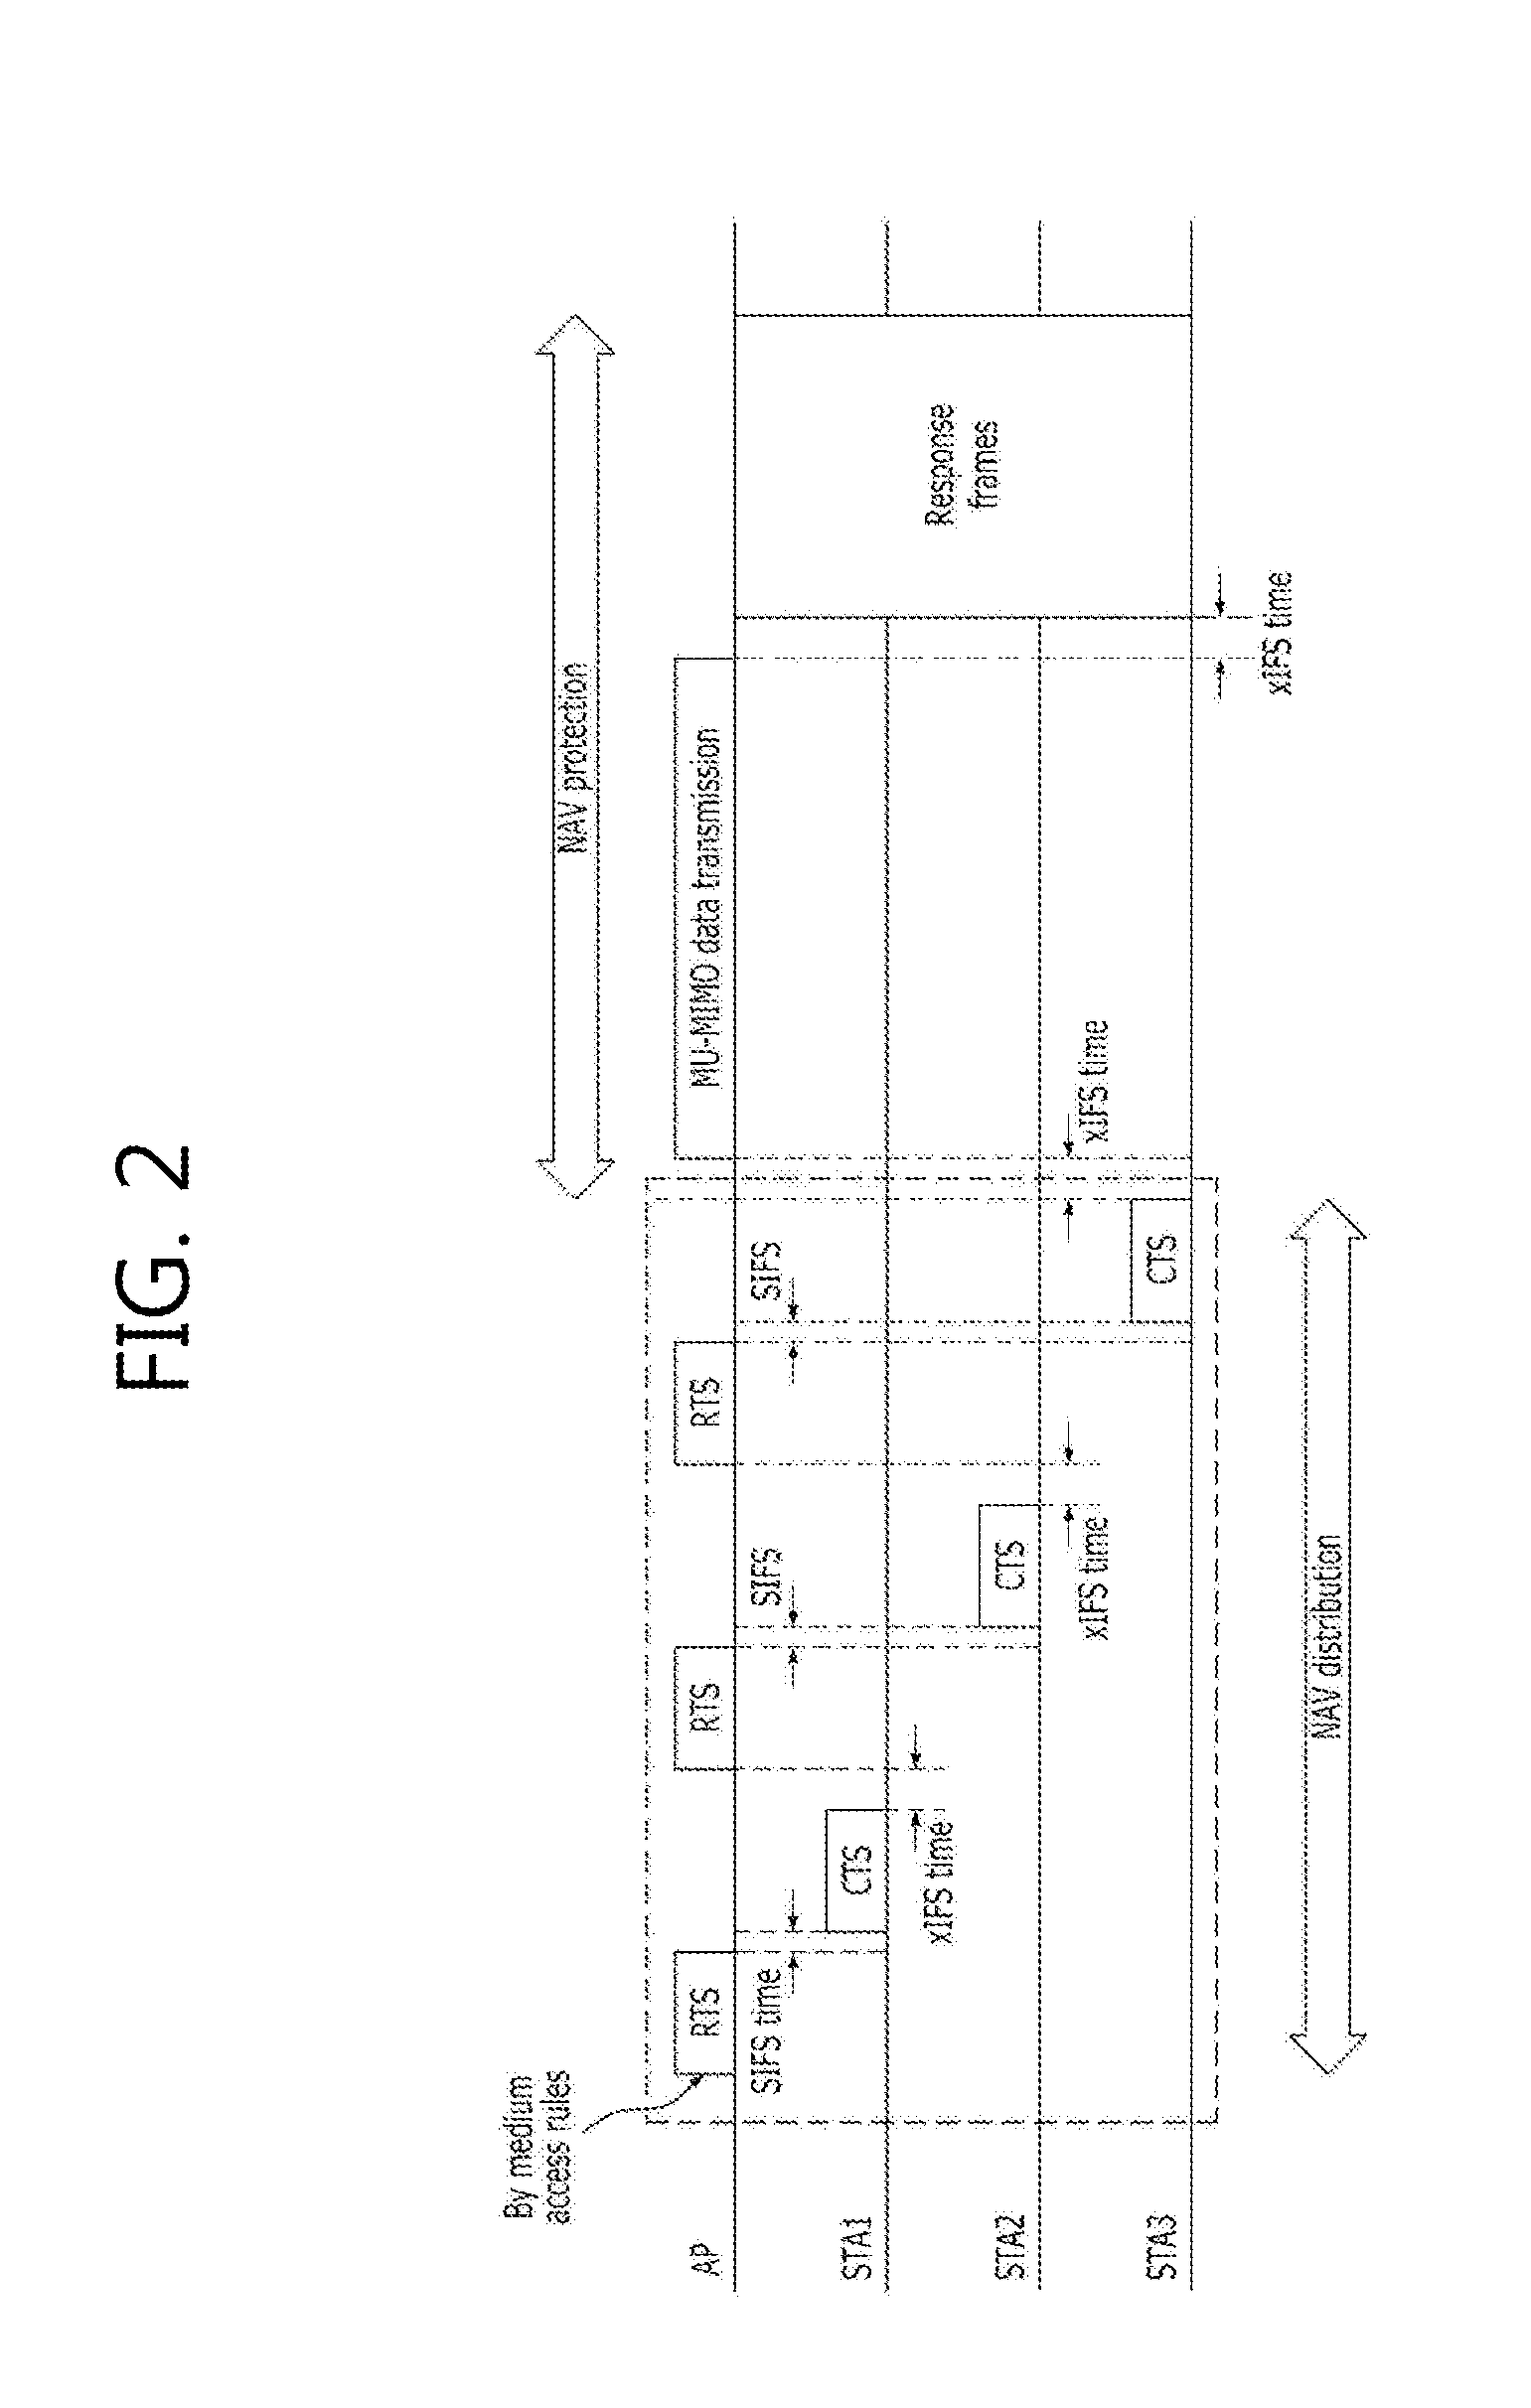 Method for protecting data in a mu-mimo based wireless communication system